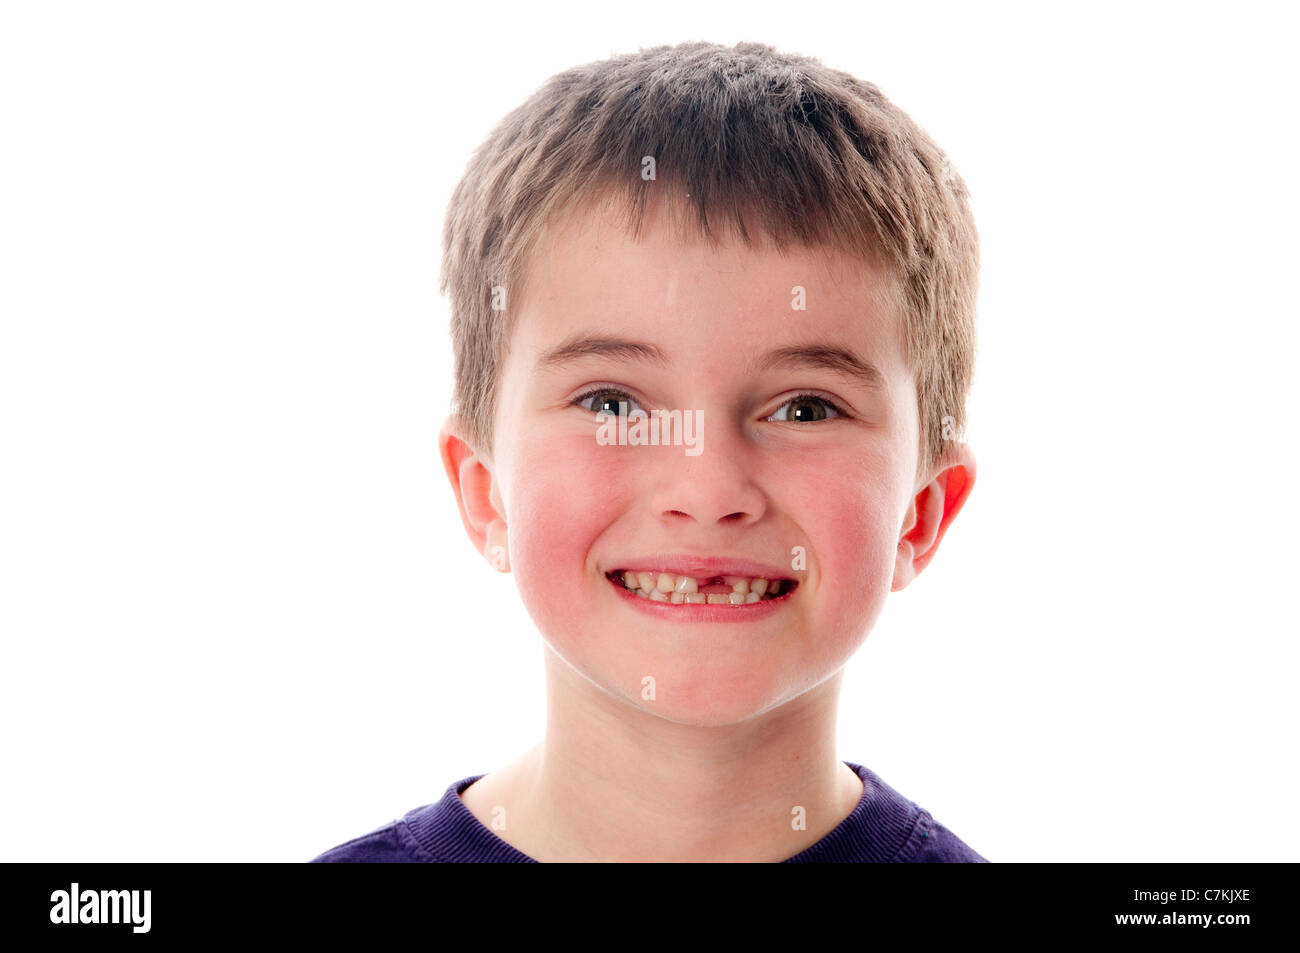 Young Boy With Missing Front Tooth Stock Photo